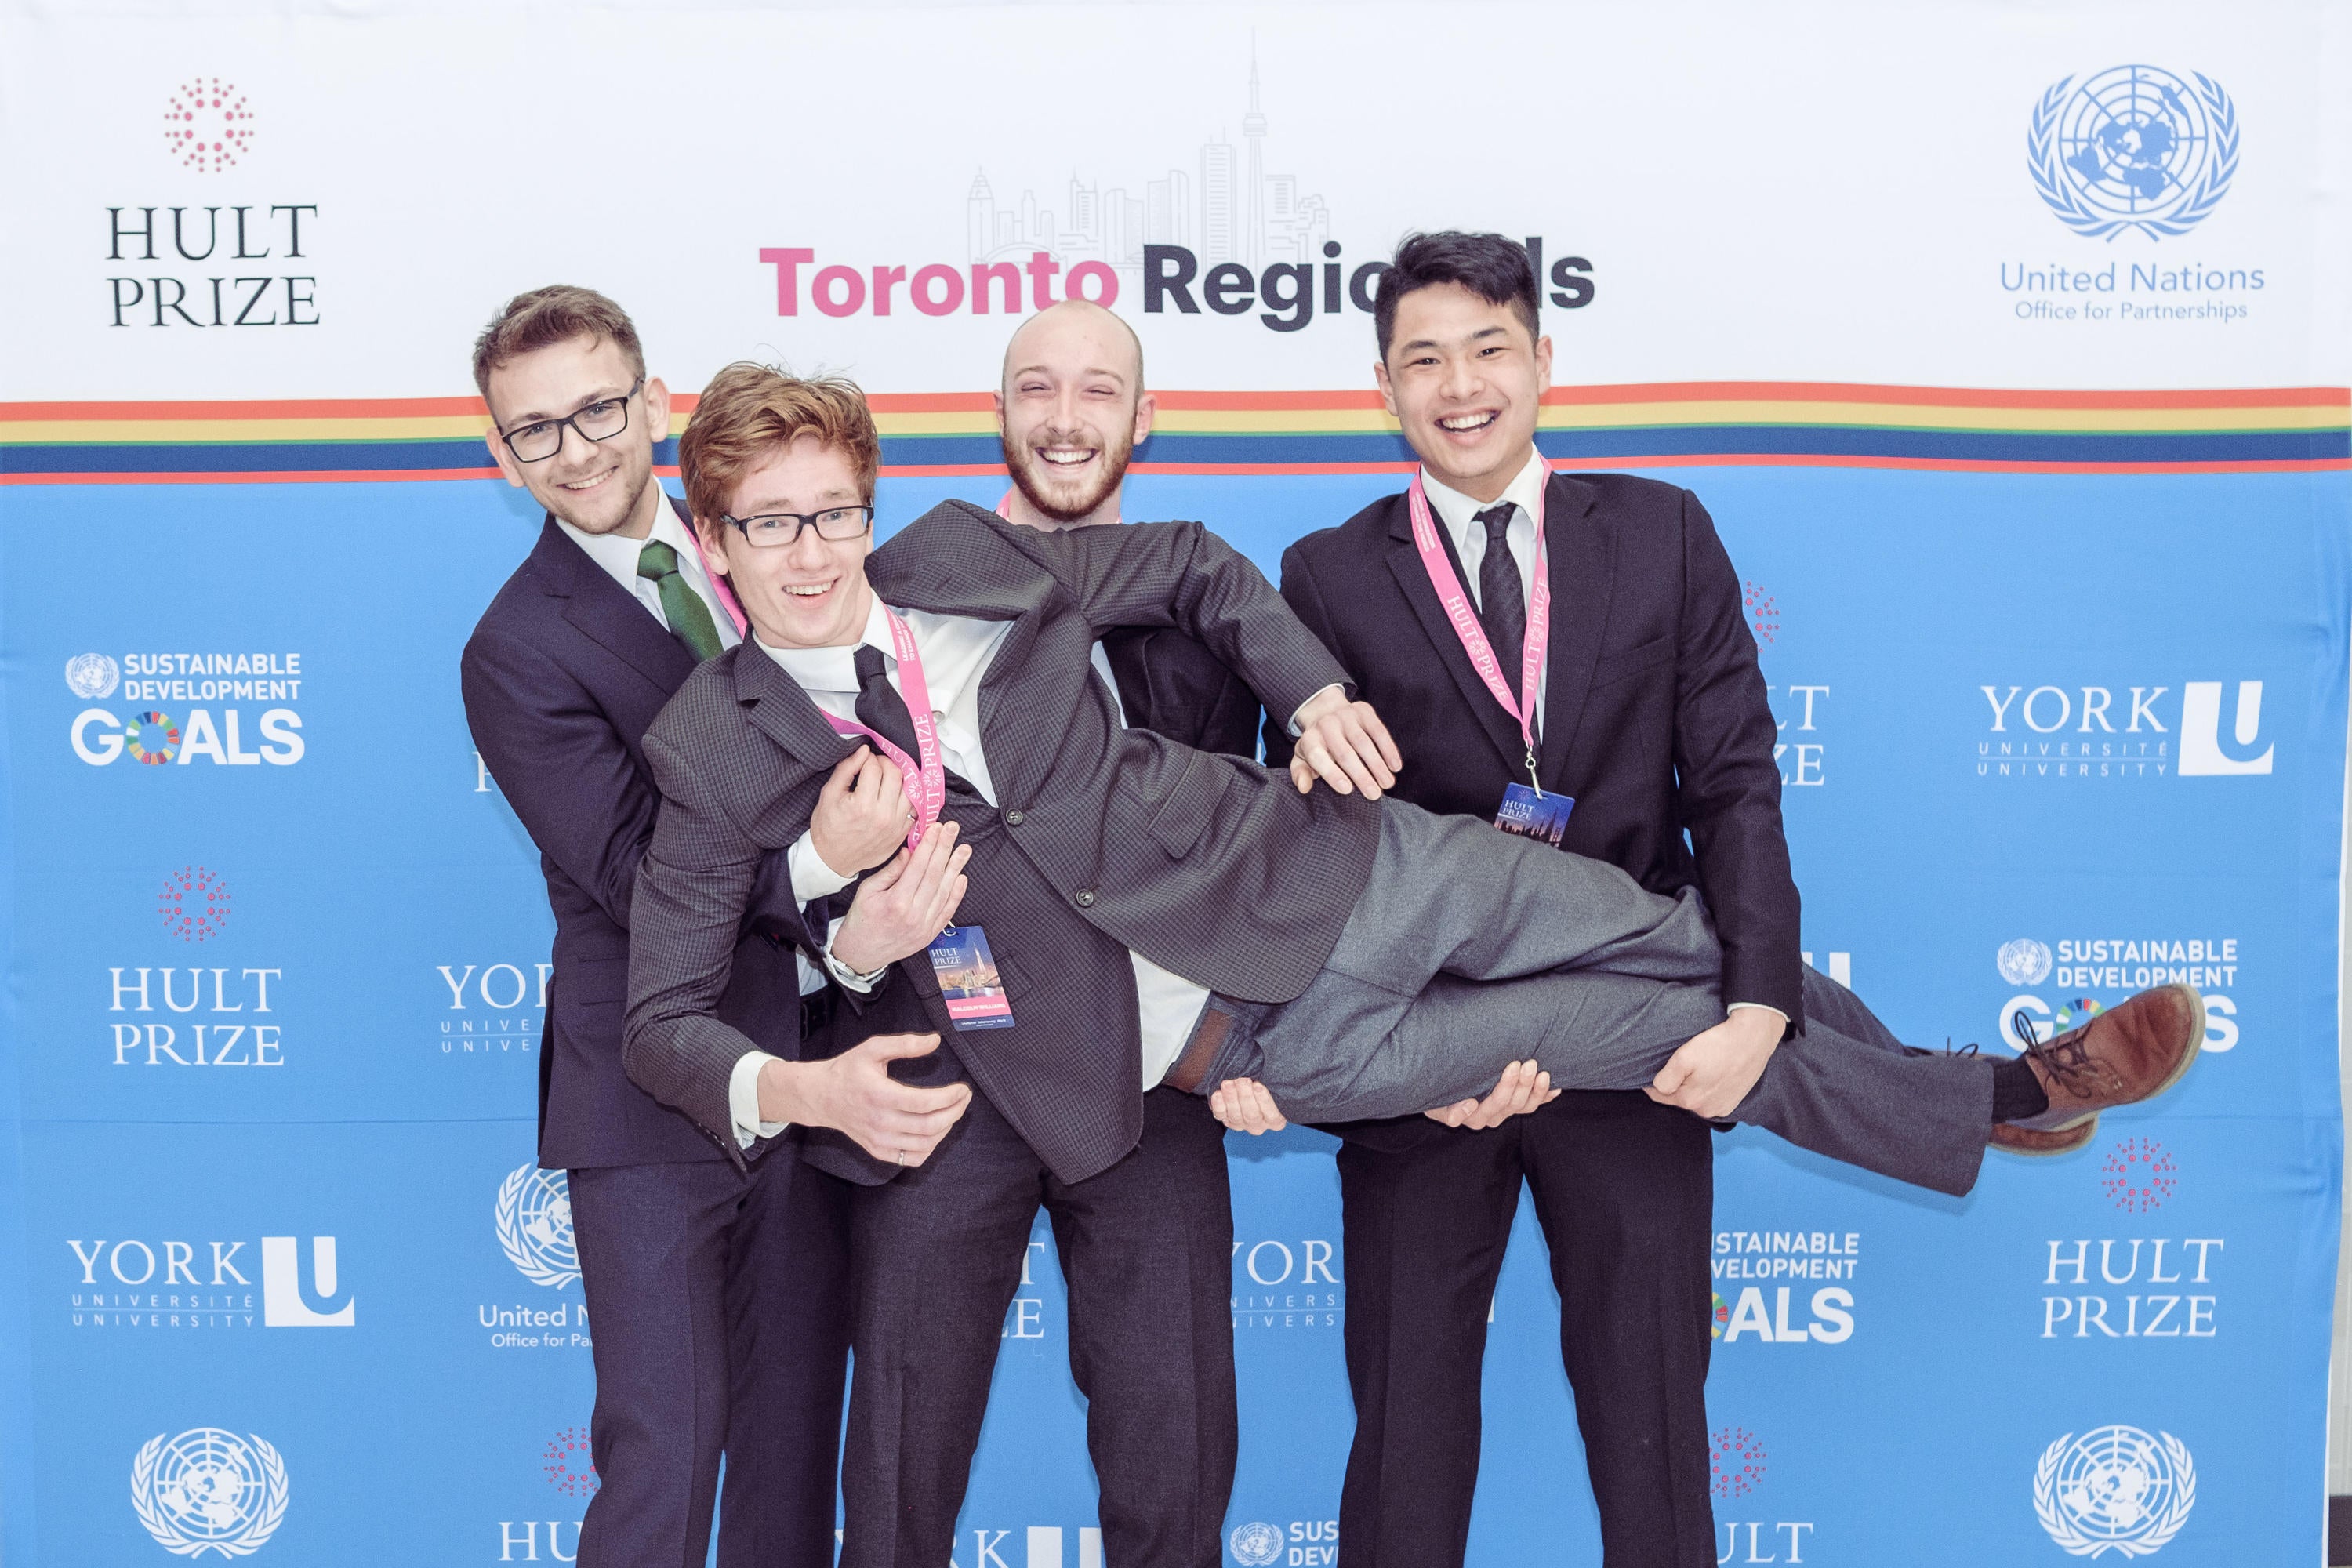 John Curticapean, Malcolm Williams, Benjamin Hudson, and Tony Qu at the Hult Prize Regional in Toronto, Canada.